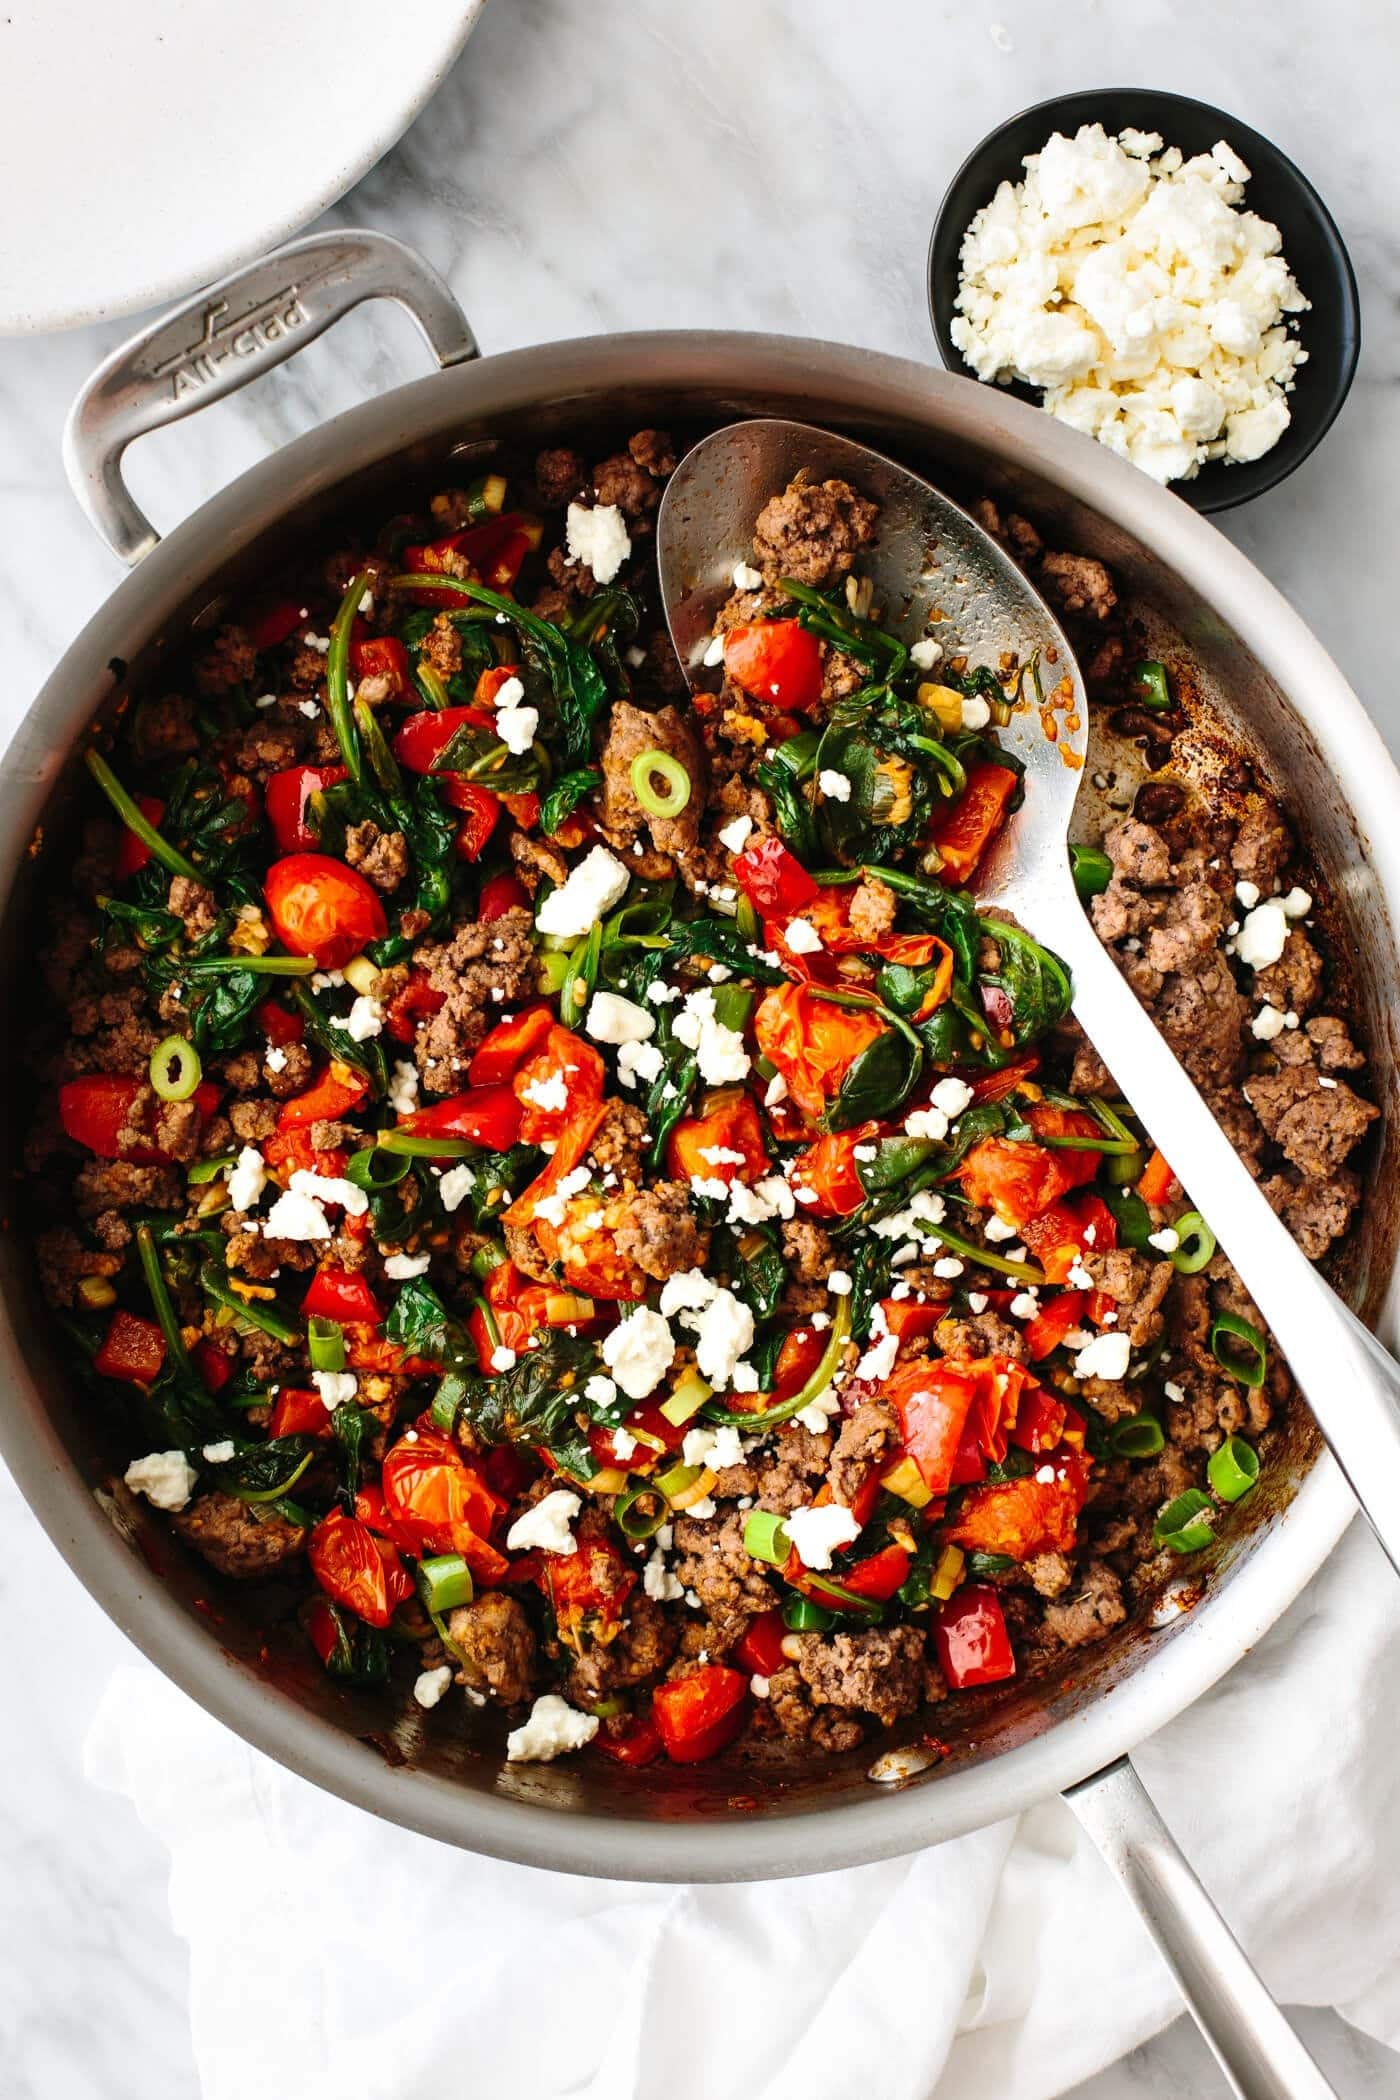 Mediterranean ground beef stir fry with spinach, tomatoes, ground beef, and scallions, and feta cheese in a bowl with a spoon.